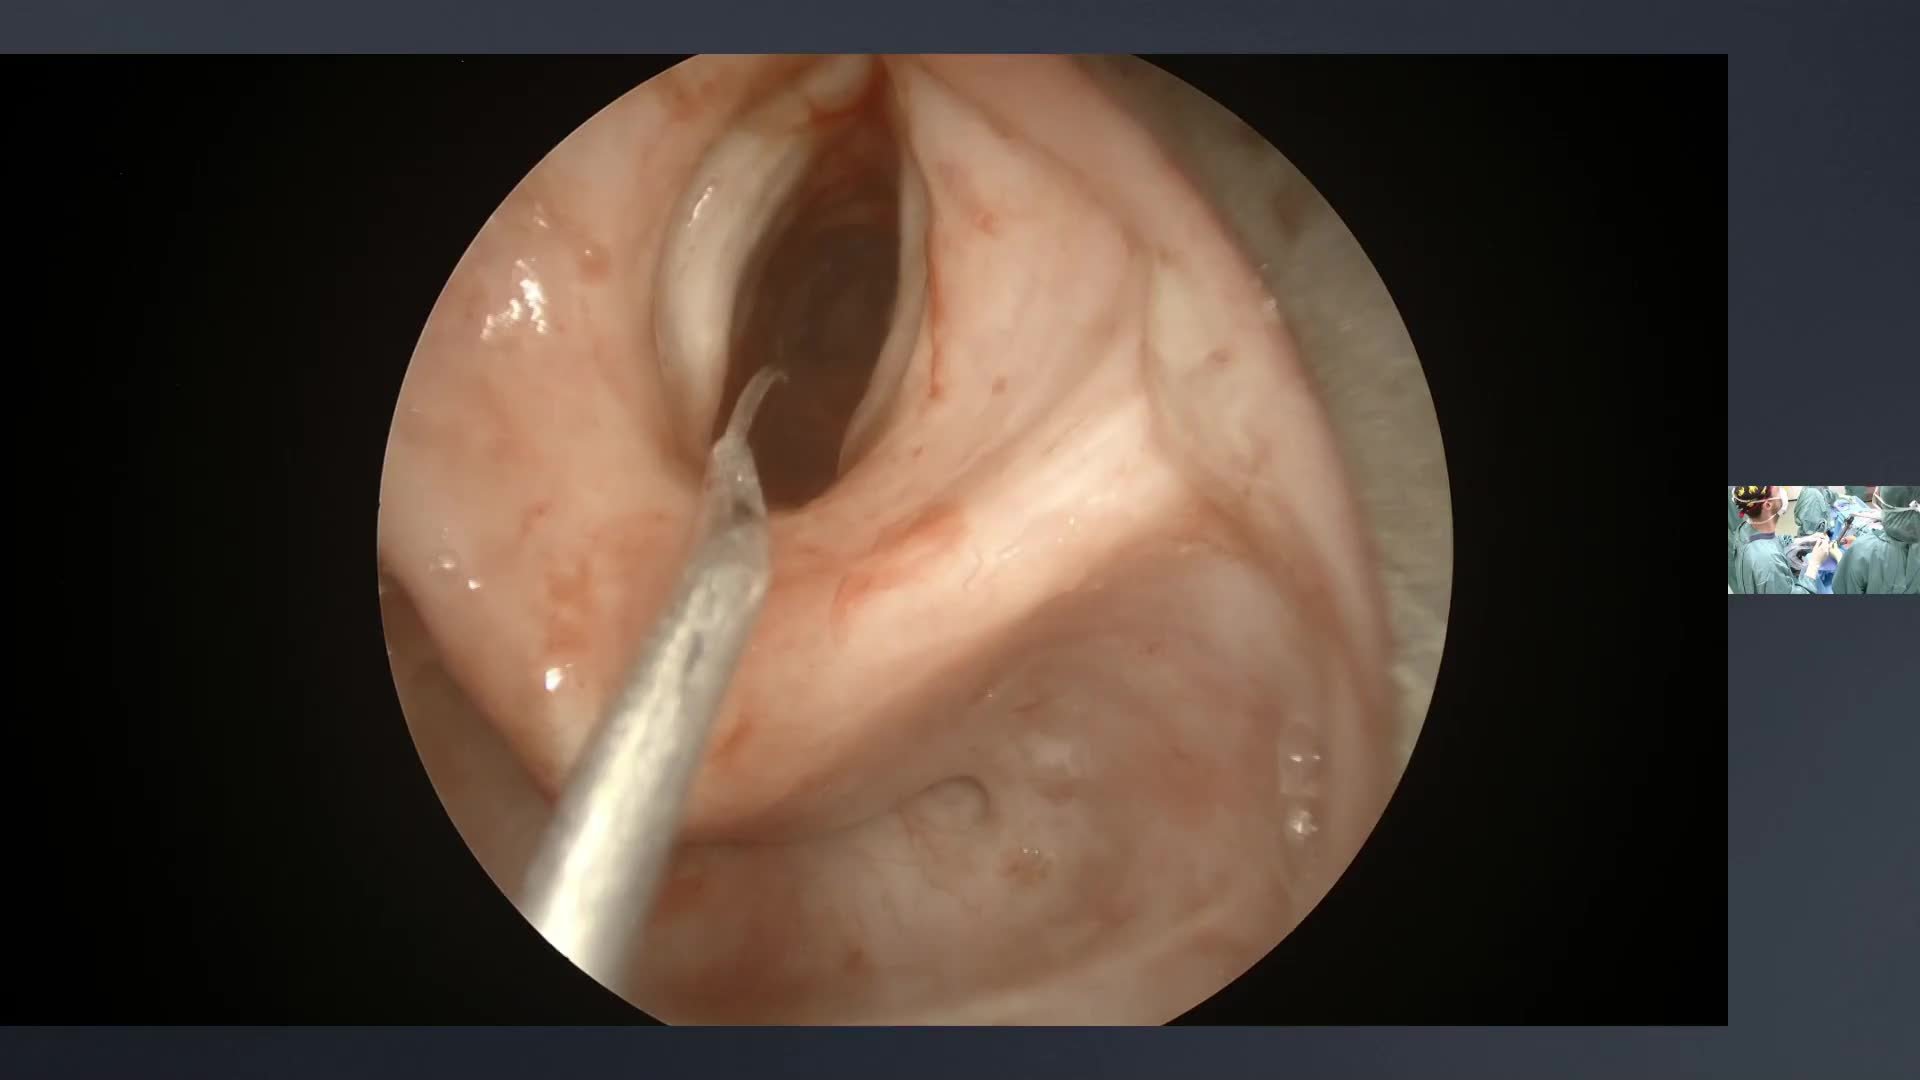 Dilation of a subglottic stenosis in a patient with tracheostomy